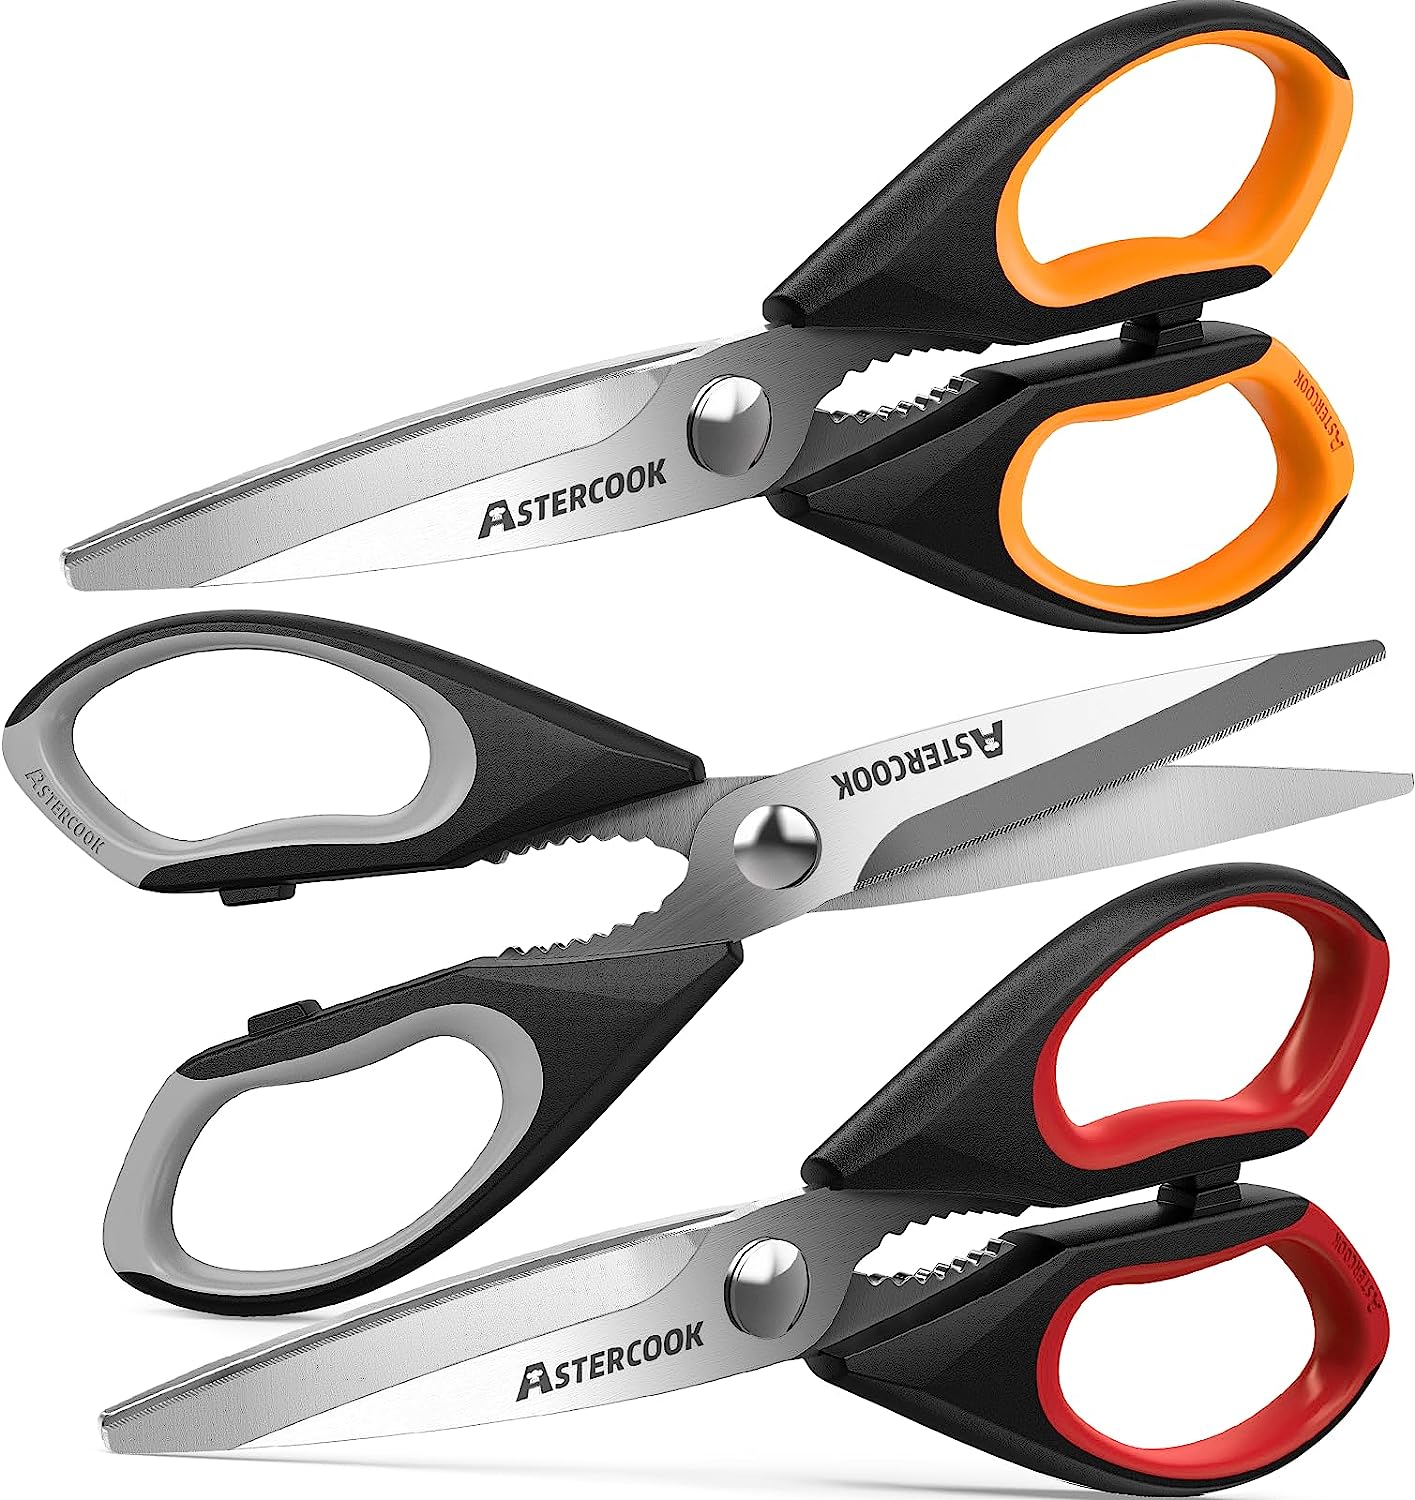 Kitchen Scissor for General Use 2-Packs,Heavy Duty Kitchen Raptor Meat Shears,Dishwasher Safe Cooking Scissors, Stainless Steel Multi-function